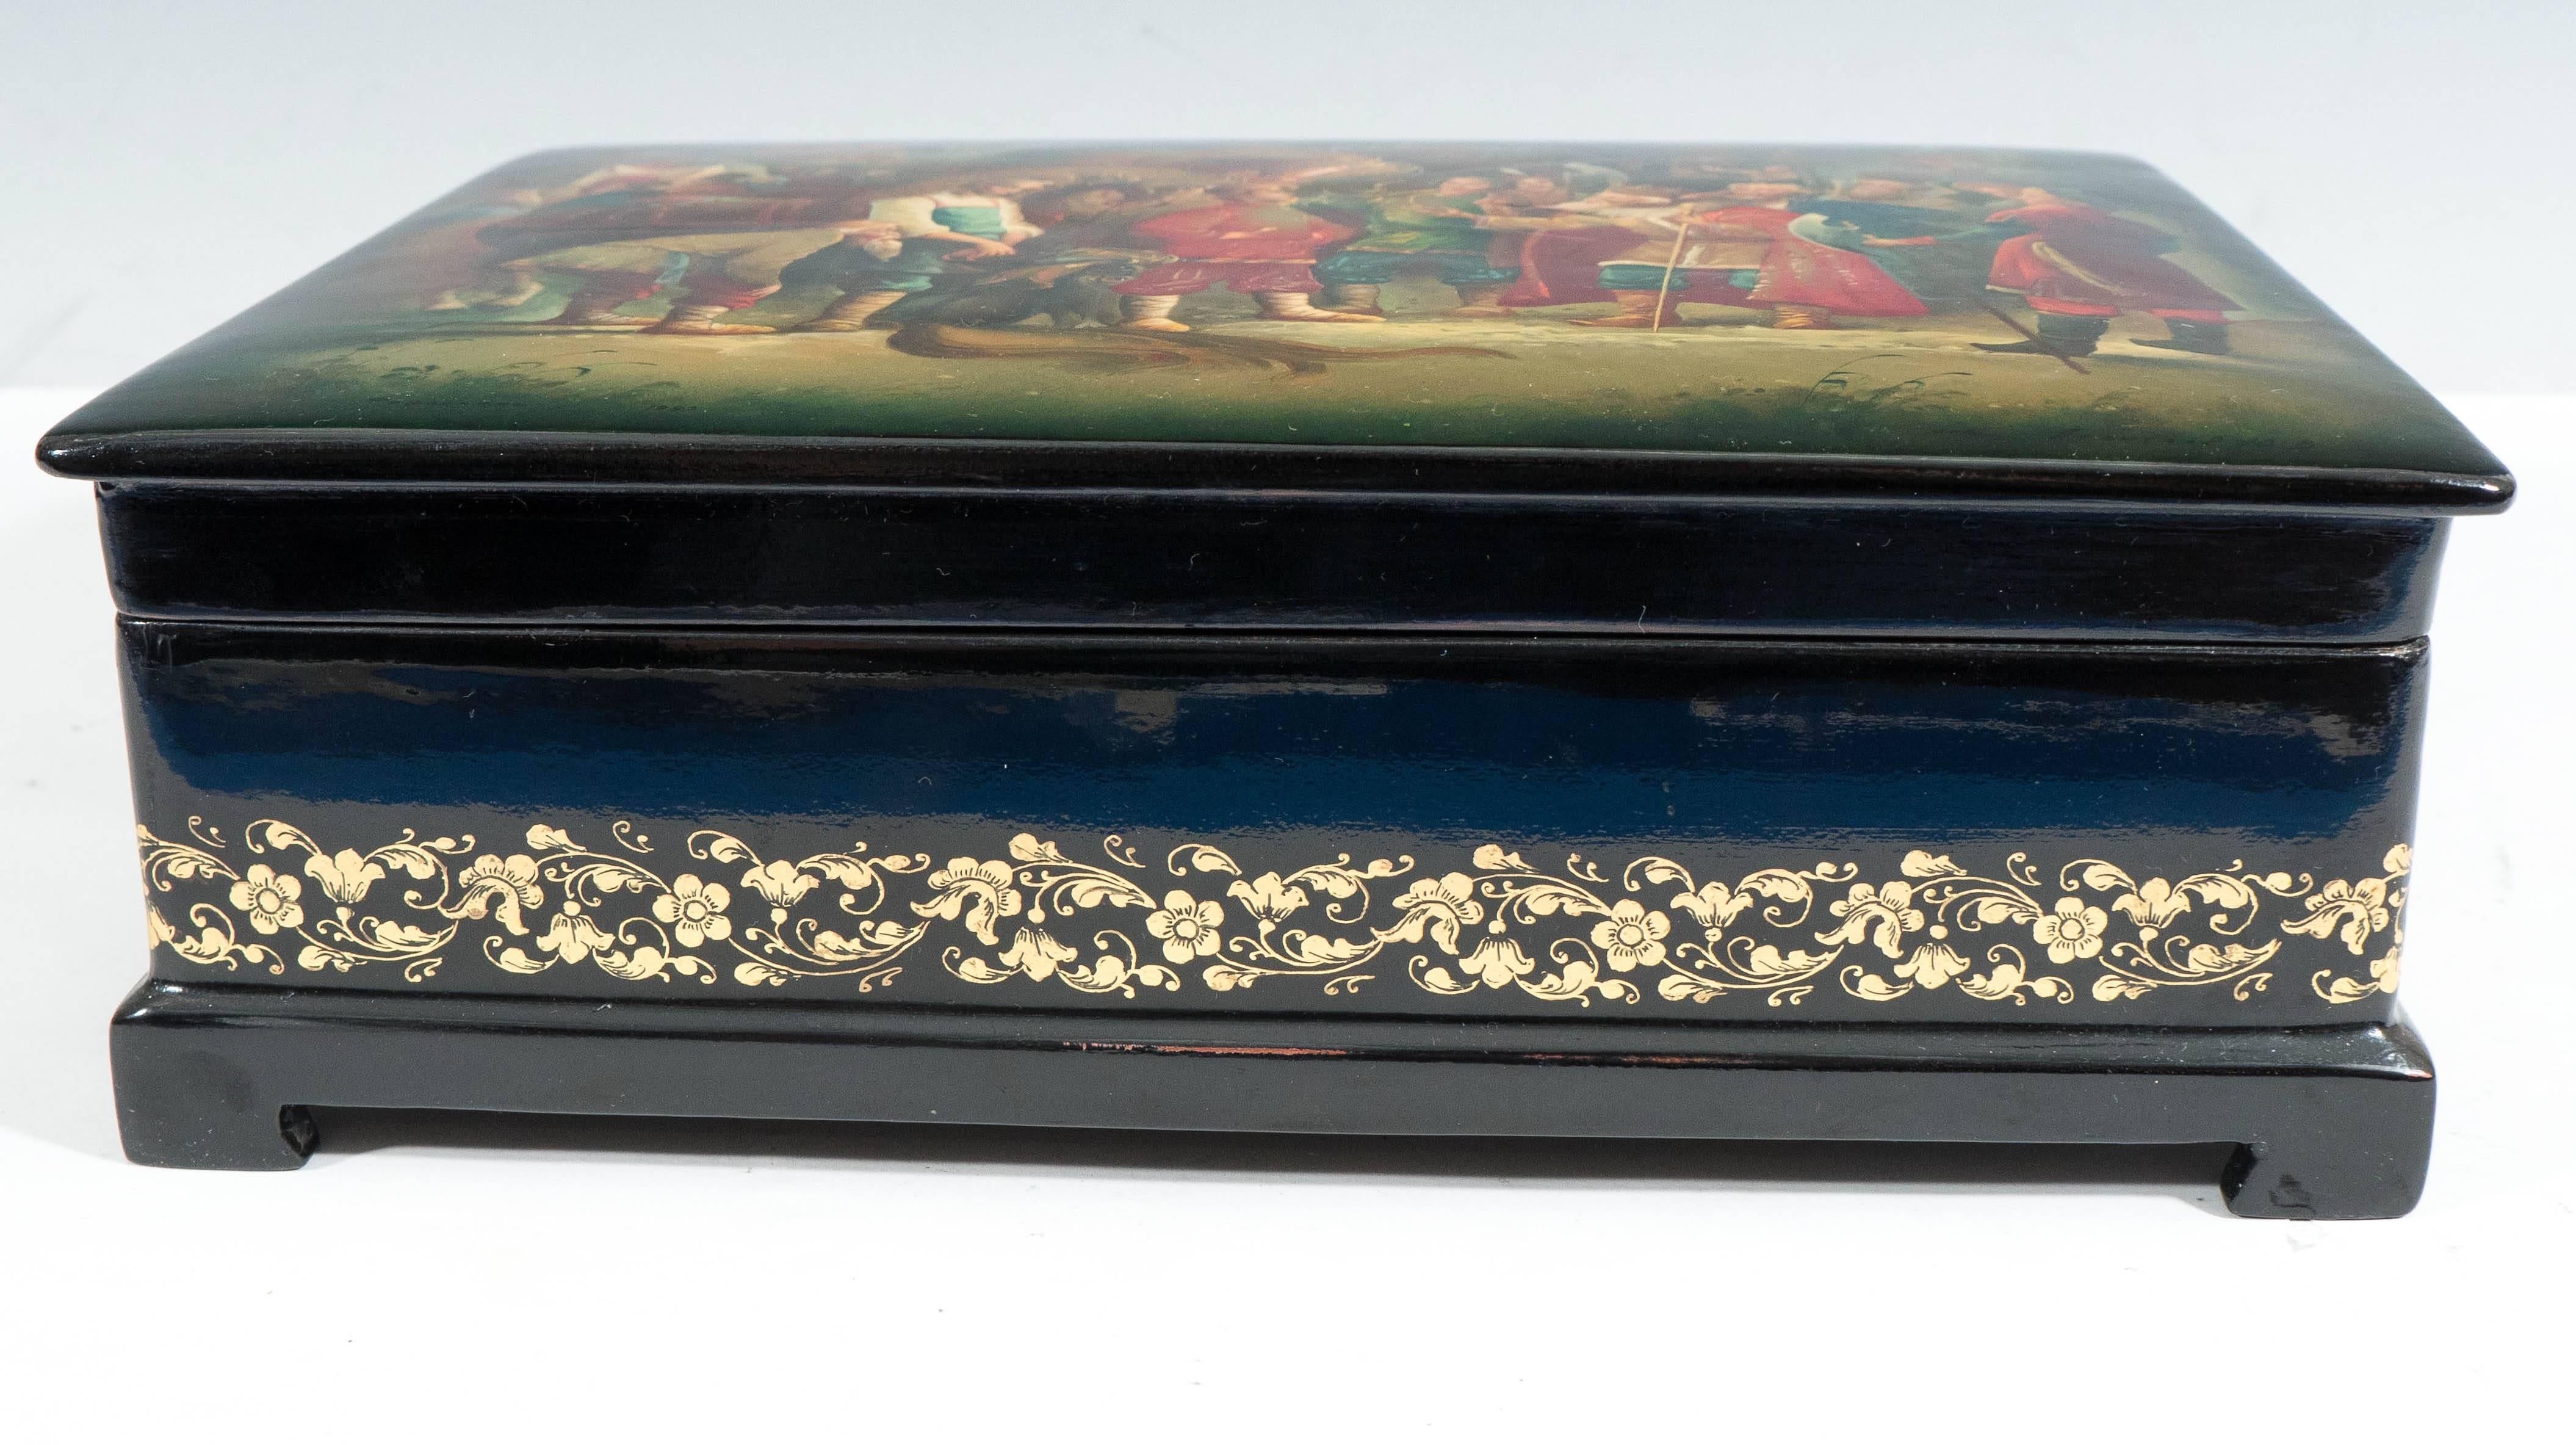 This exquisite Russian Fedoskino black lacquer box, with bright red interior, produced circa 1980s, depicts a vividly detailed scene from the much adapted fairy tale 'The Little Humpbacked Horse' ('Konyok-Gorbunok'). The historic village of